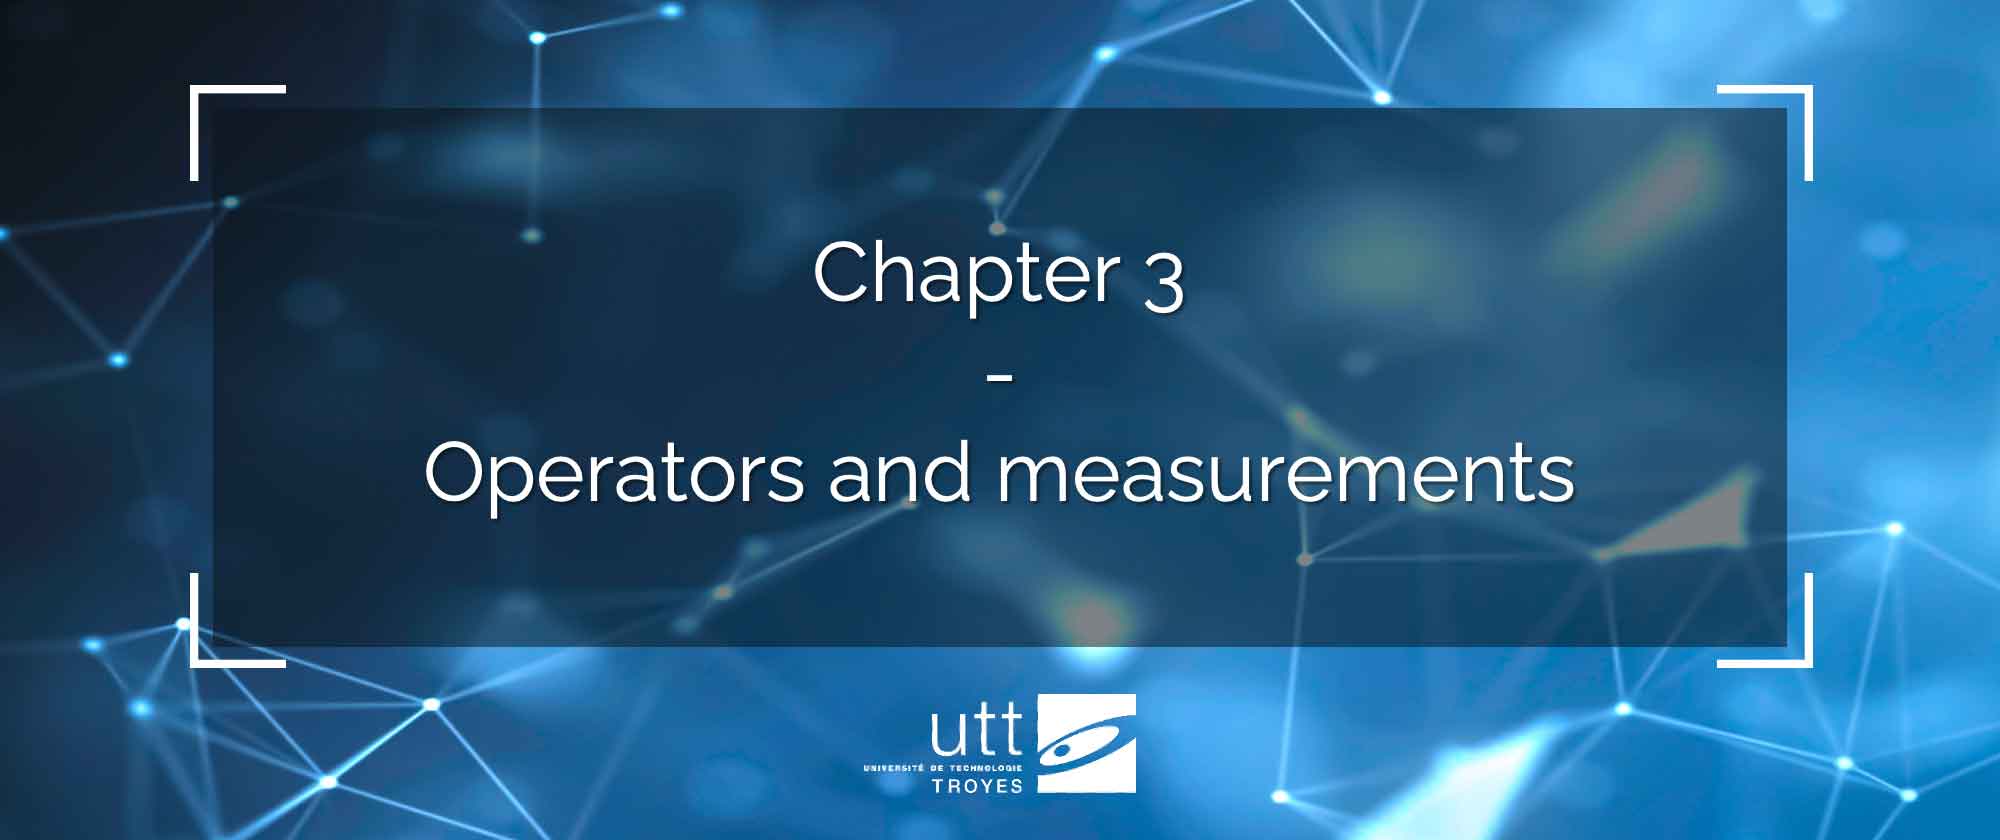 Chapter 3 - Operators and measurements